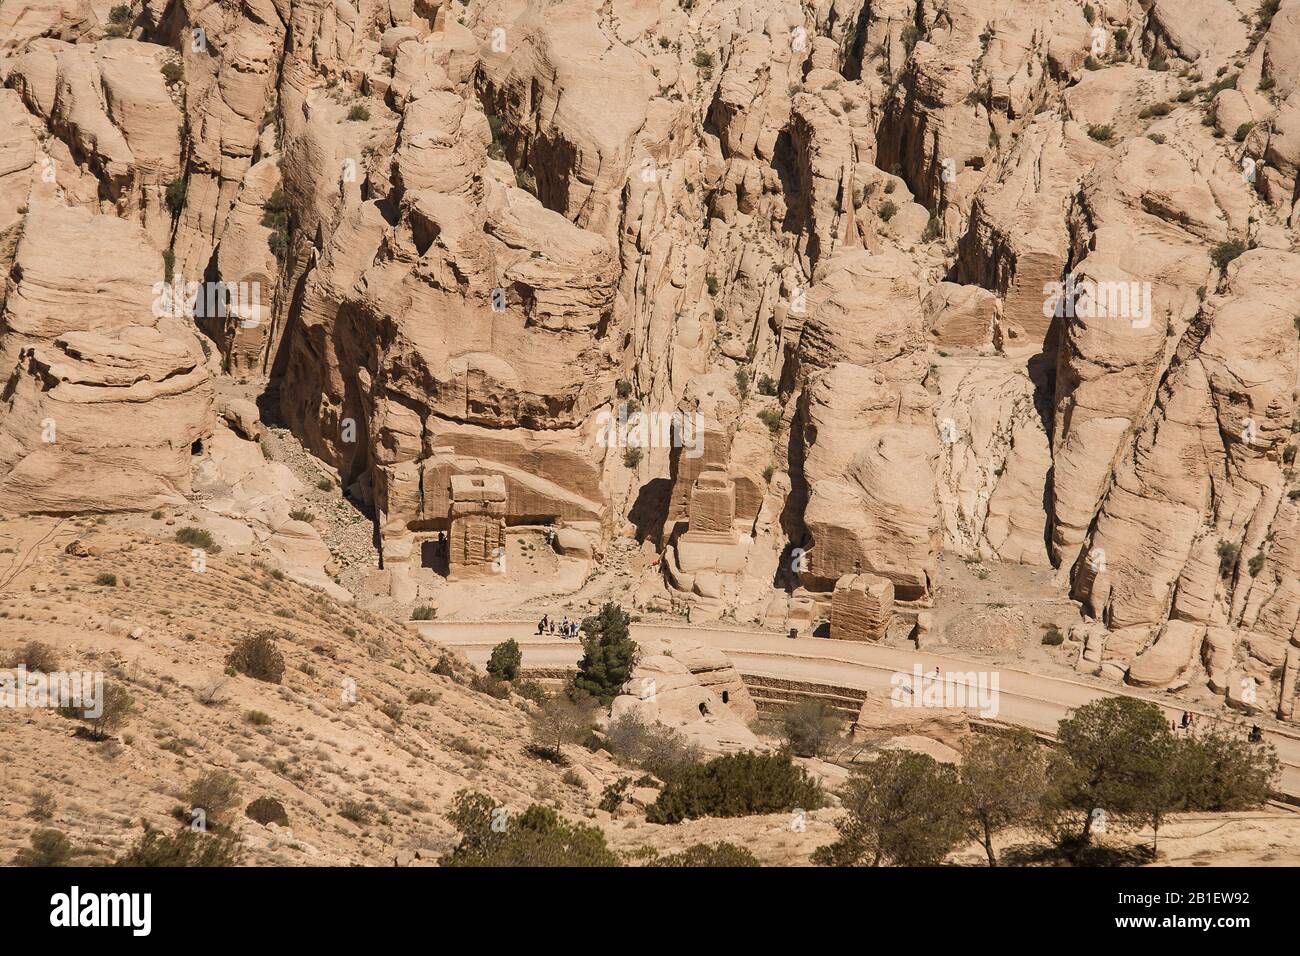 Petra, Jordan, April 30, 2009: A barely seen stone road leading to the ancient city of Petra between desert rock formations. Stock Photo